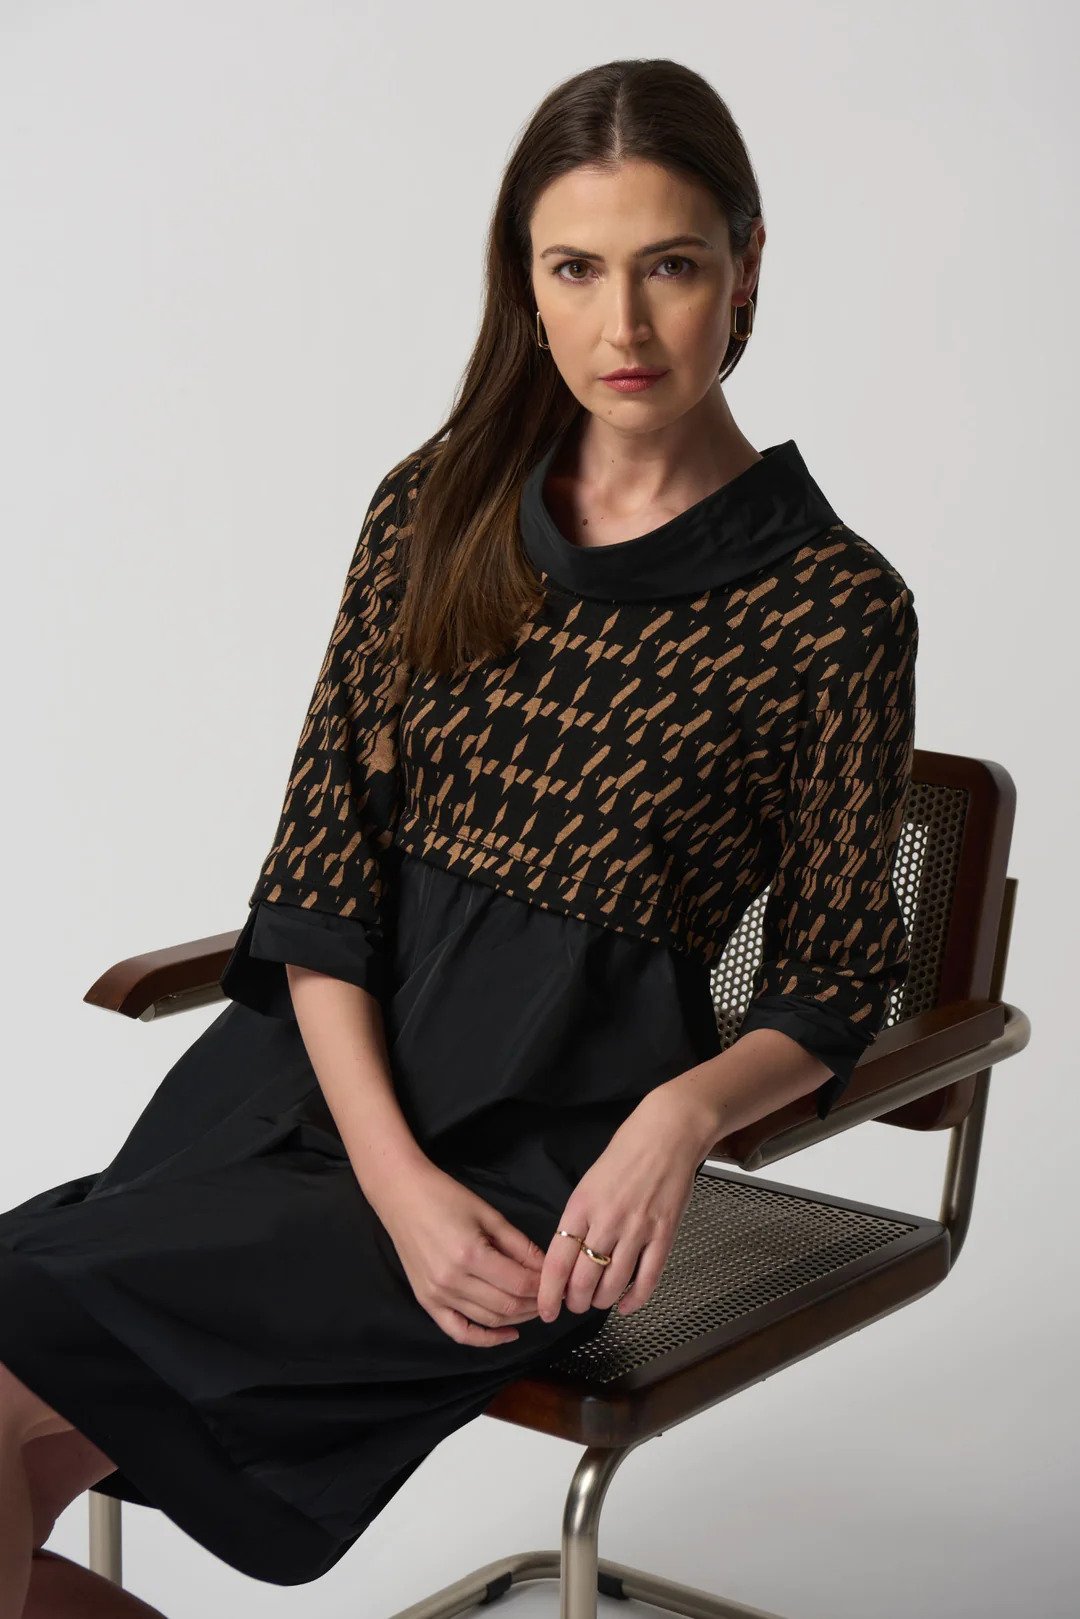 Houndstooth Print Dress Style 233174 Posing in a Chair.